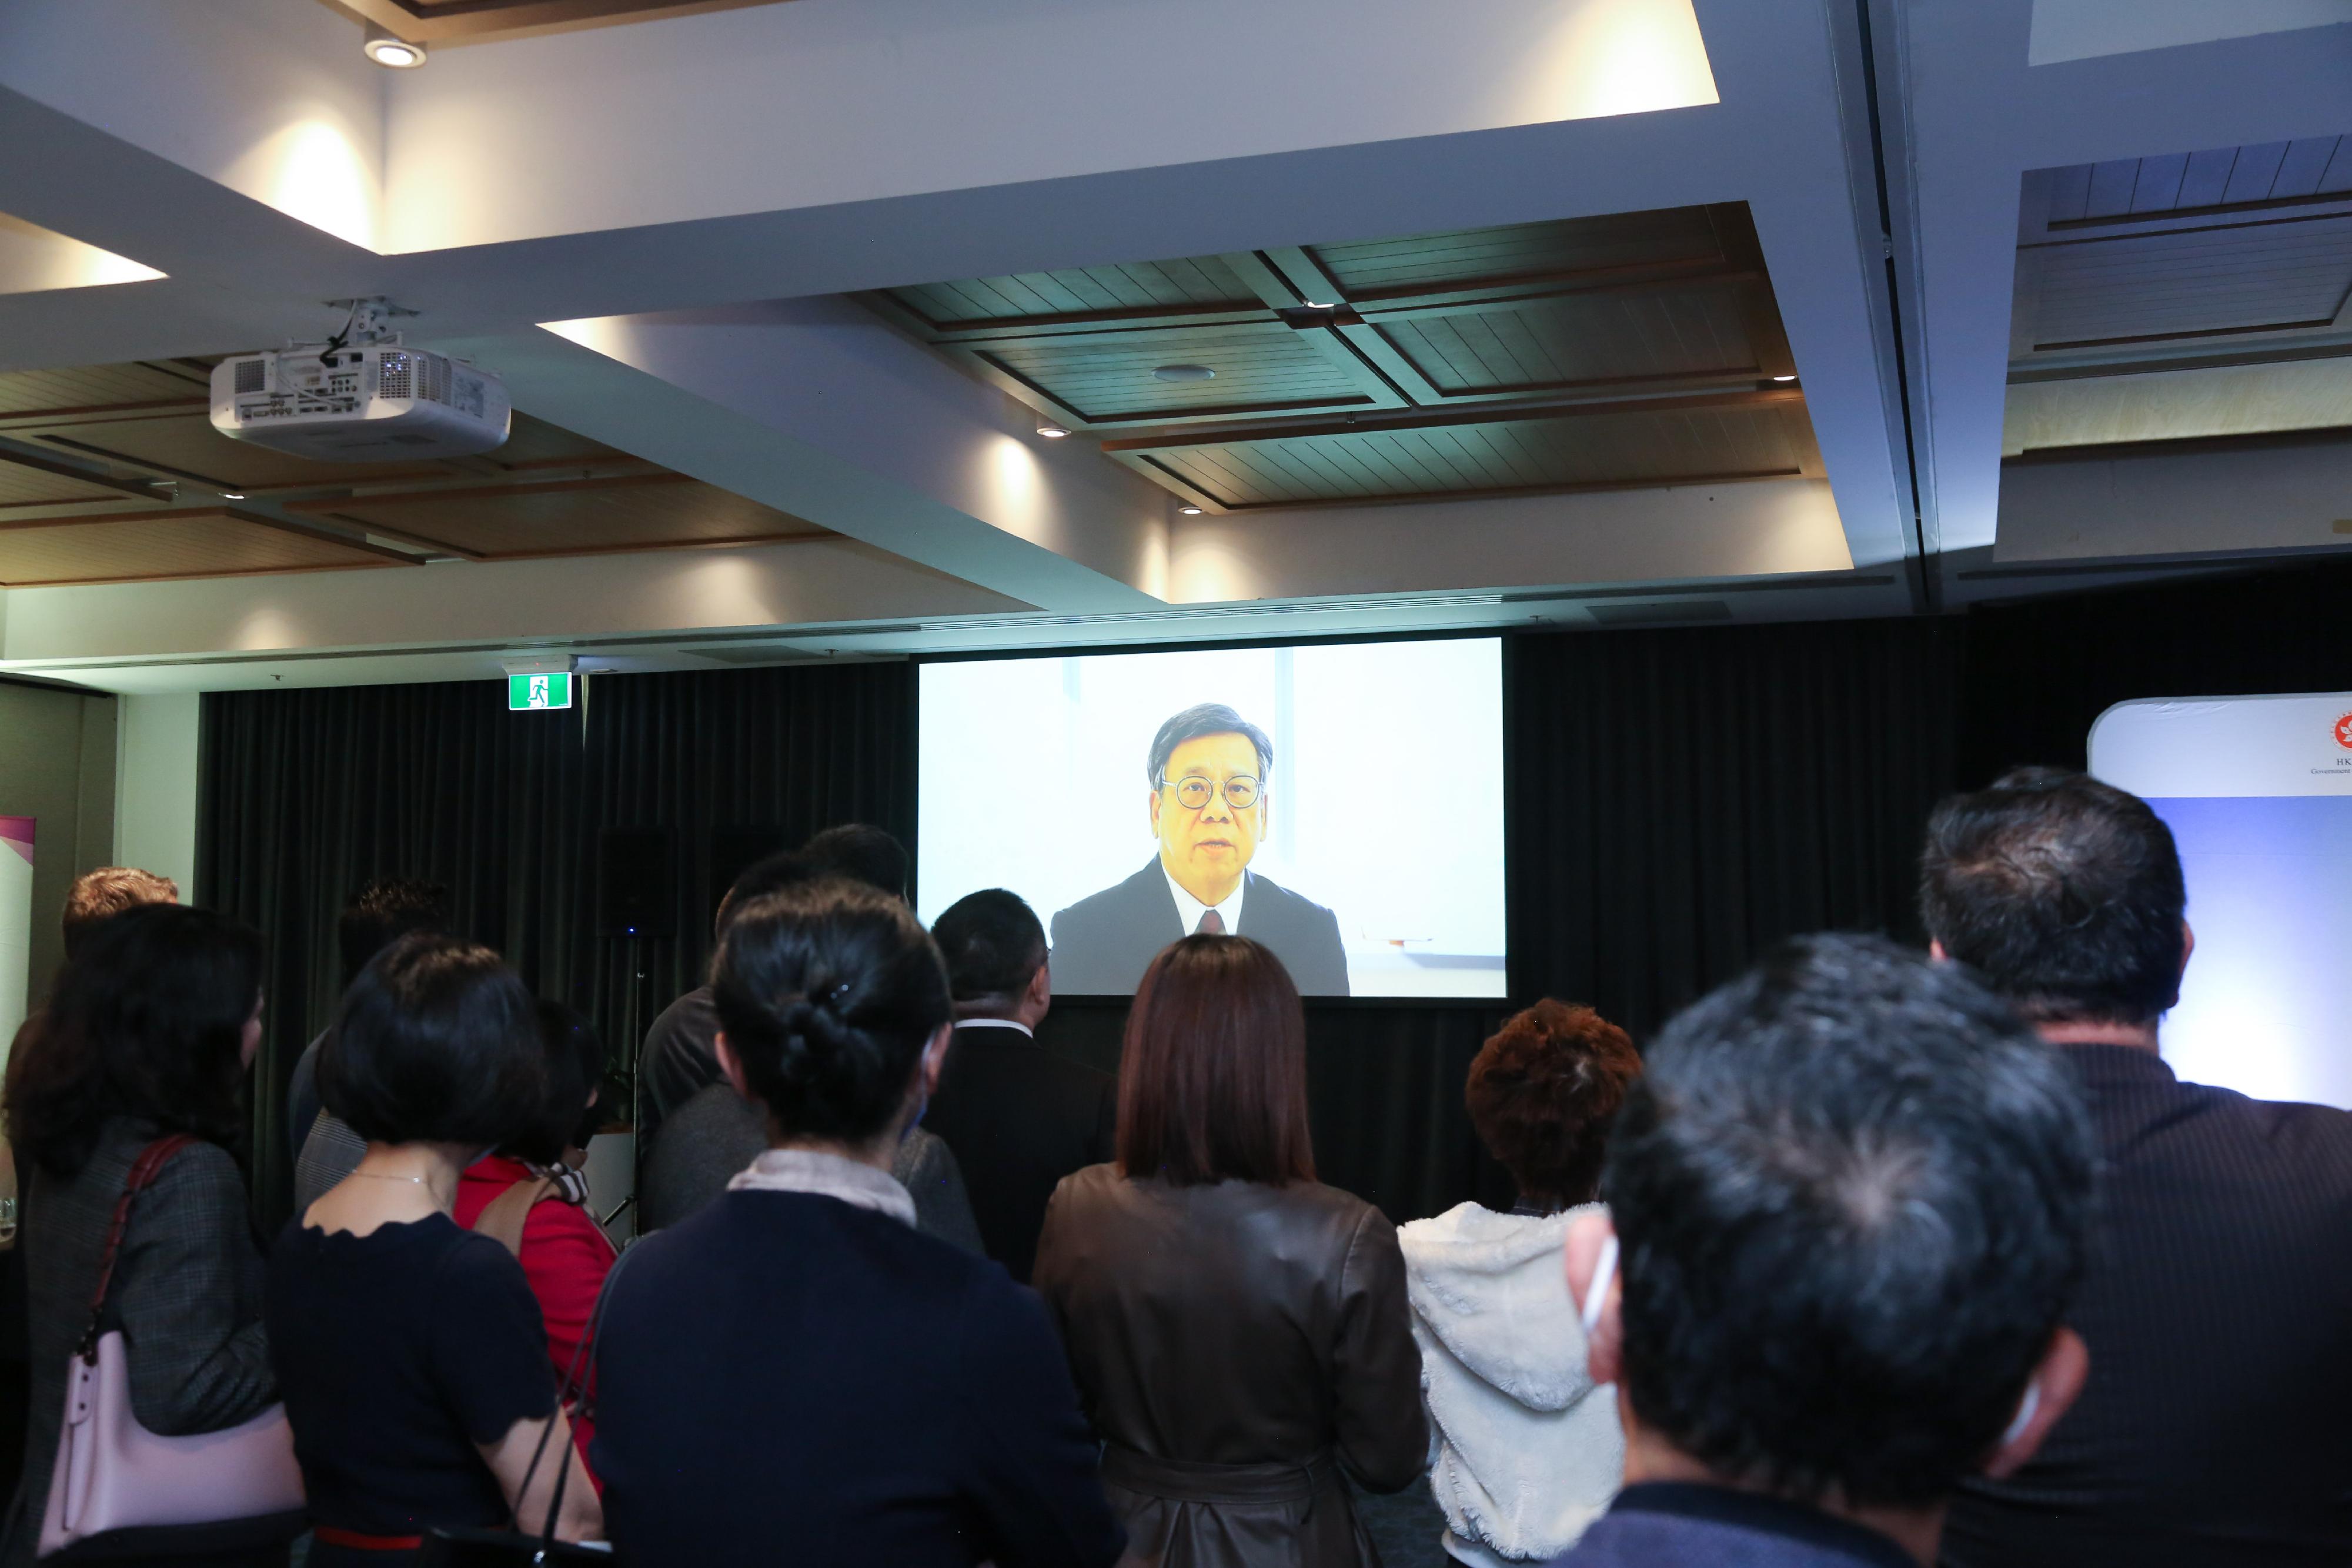 The Hong Kong Economic and Trade Office, Sydney hosted a reception in Auckland, New Zealand, today (August 2) to mark the 25th anniversary of the establishment of the Hong Kong Special Administrative Region. Photo shows the Secretary for Commerce and Economic Development, Mr Algernon Yau, delivering a virtual speech to highlight Hong Kong’s unique advantages under "one country, two systems" and its latest trade relationship with New Zealand.